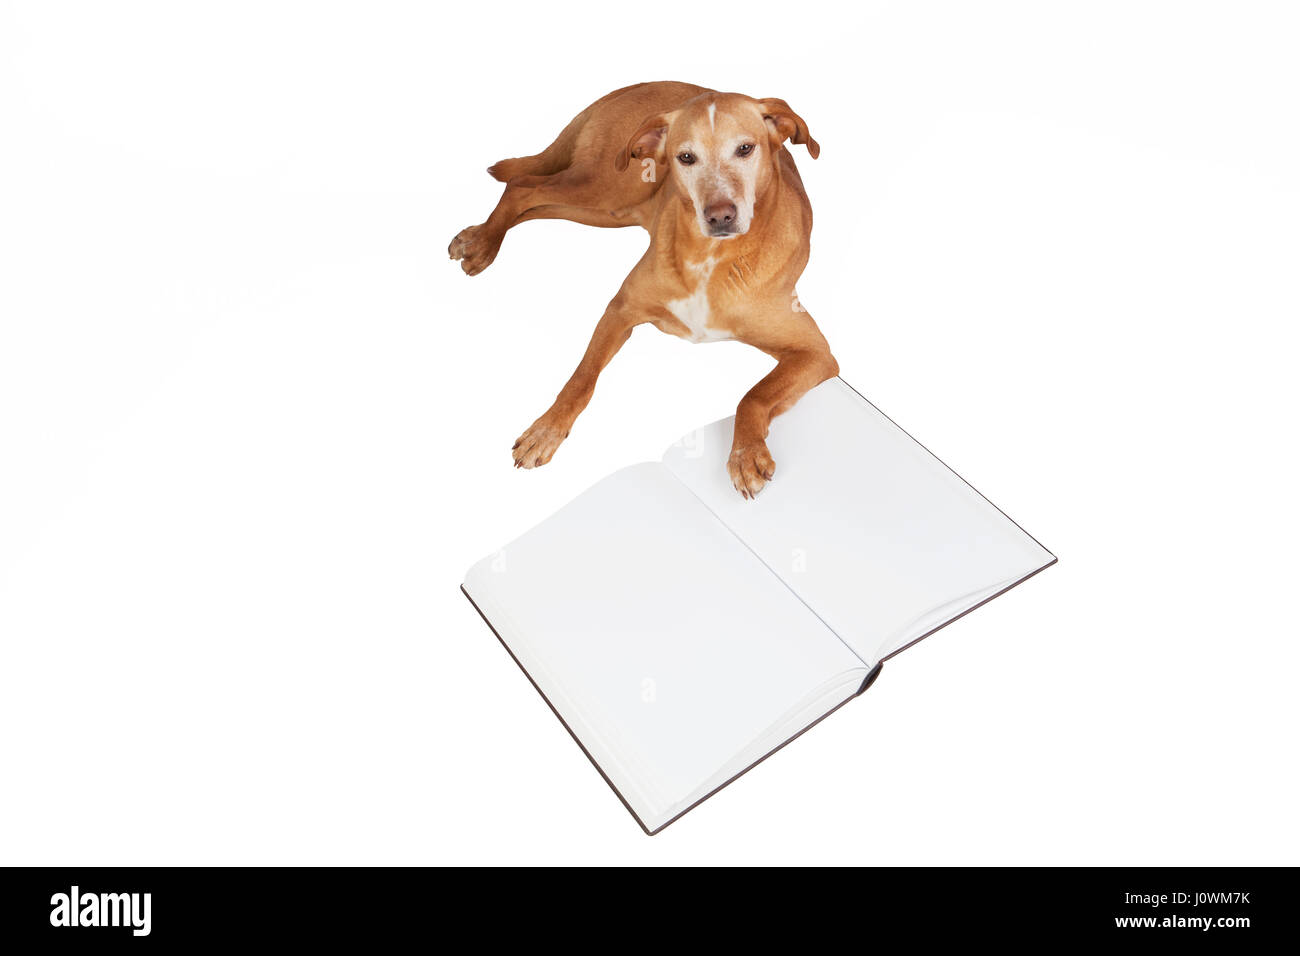 Brown dog lying by an open book. Animals training, education, erudition. Isolated on a white background. Stock Photo